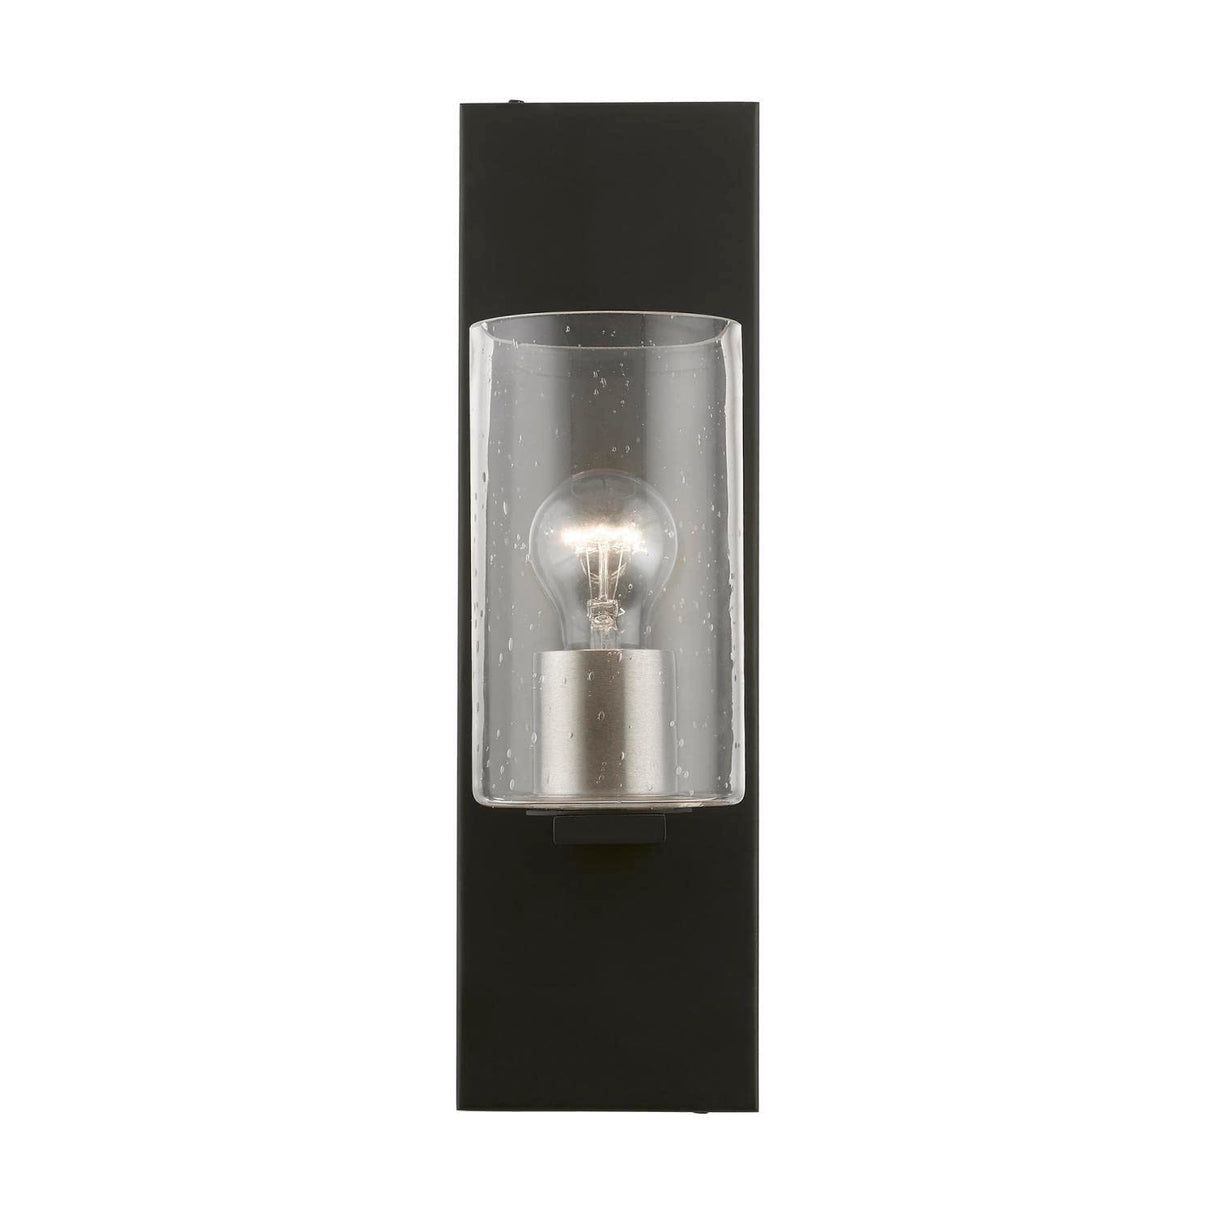 Zurich 1 Light Wall Sconce in Black with Brushed Nickel (18471-04)